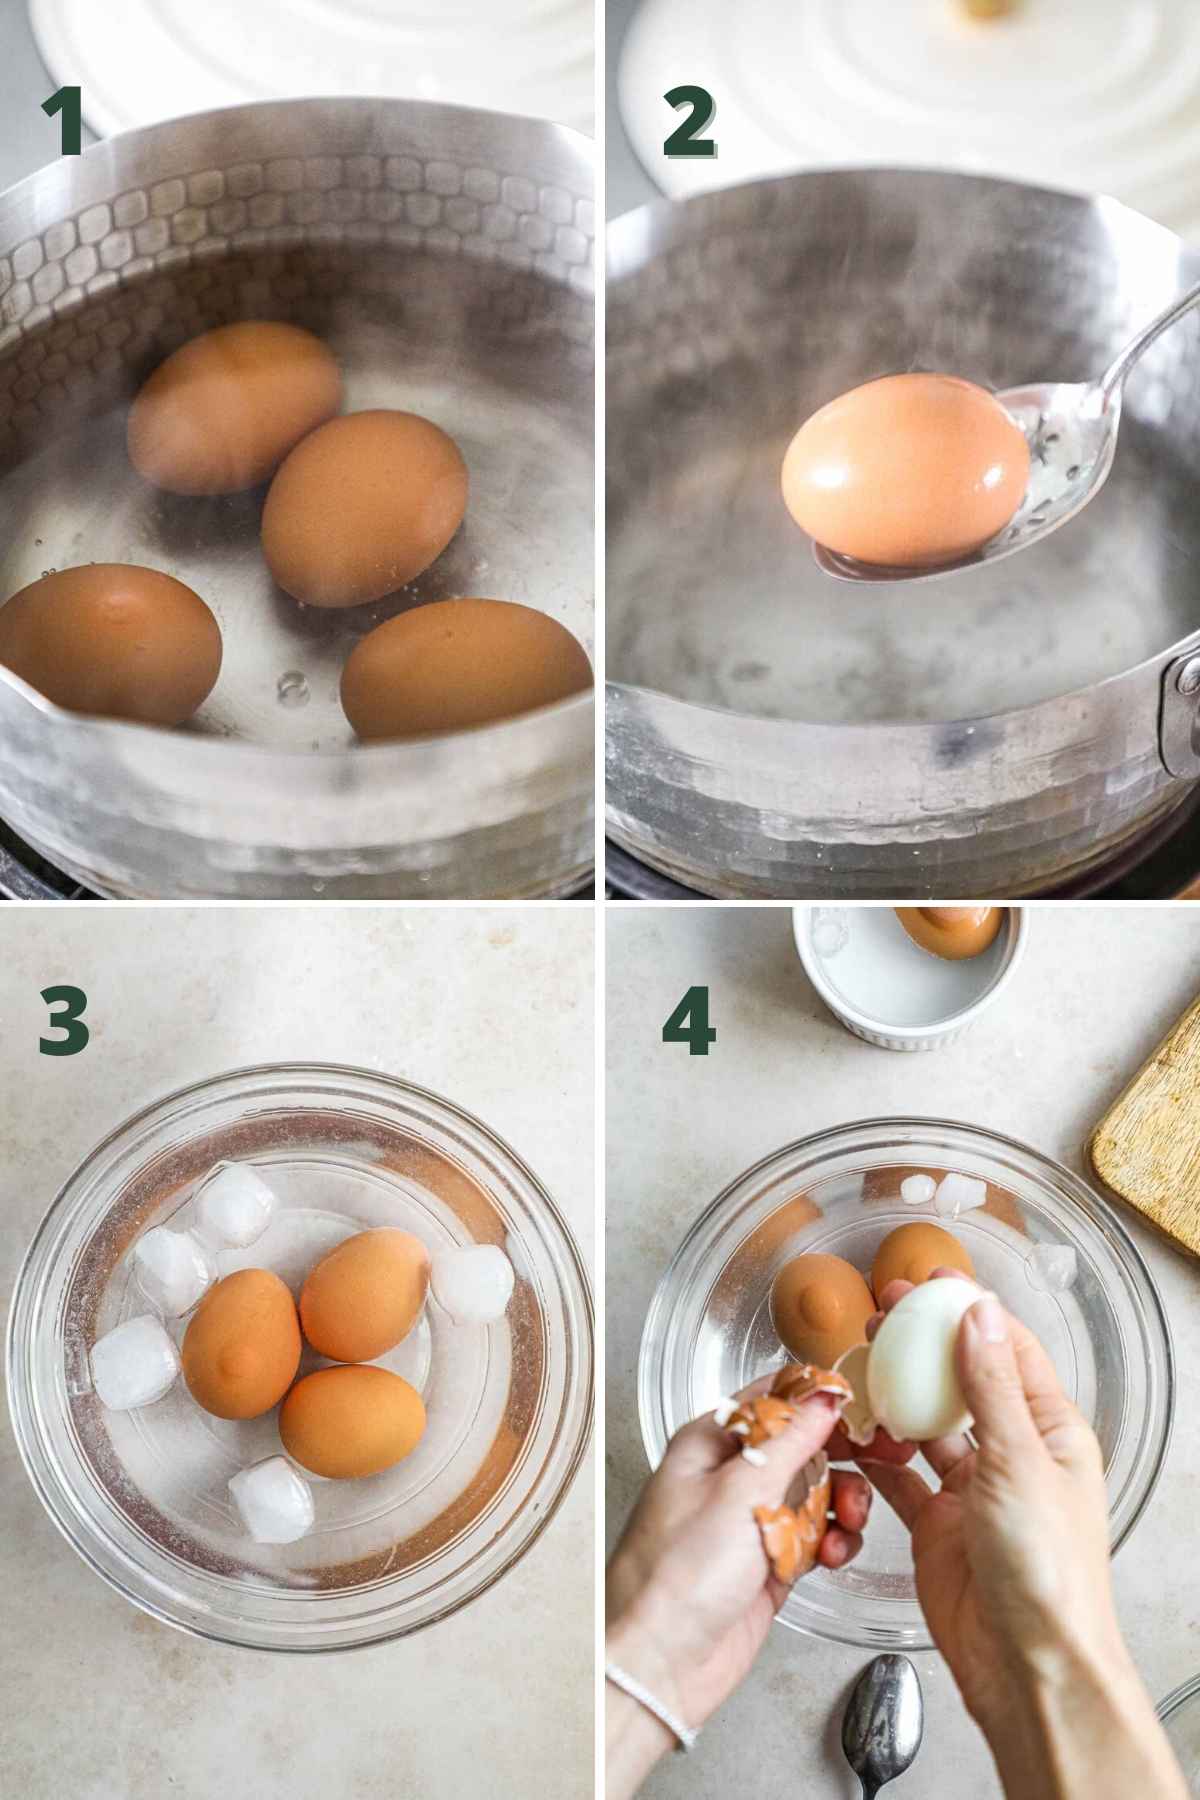 Steps to make easy and simple egg salad, including soft boiling and hard-boiling eggs, chilling eggs in an ice bath, and peeling the eggs.